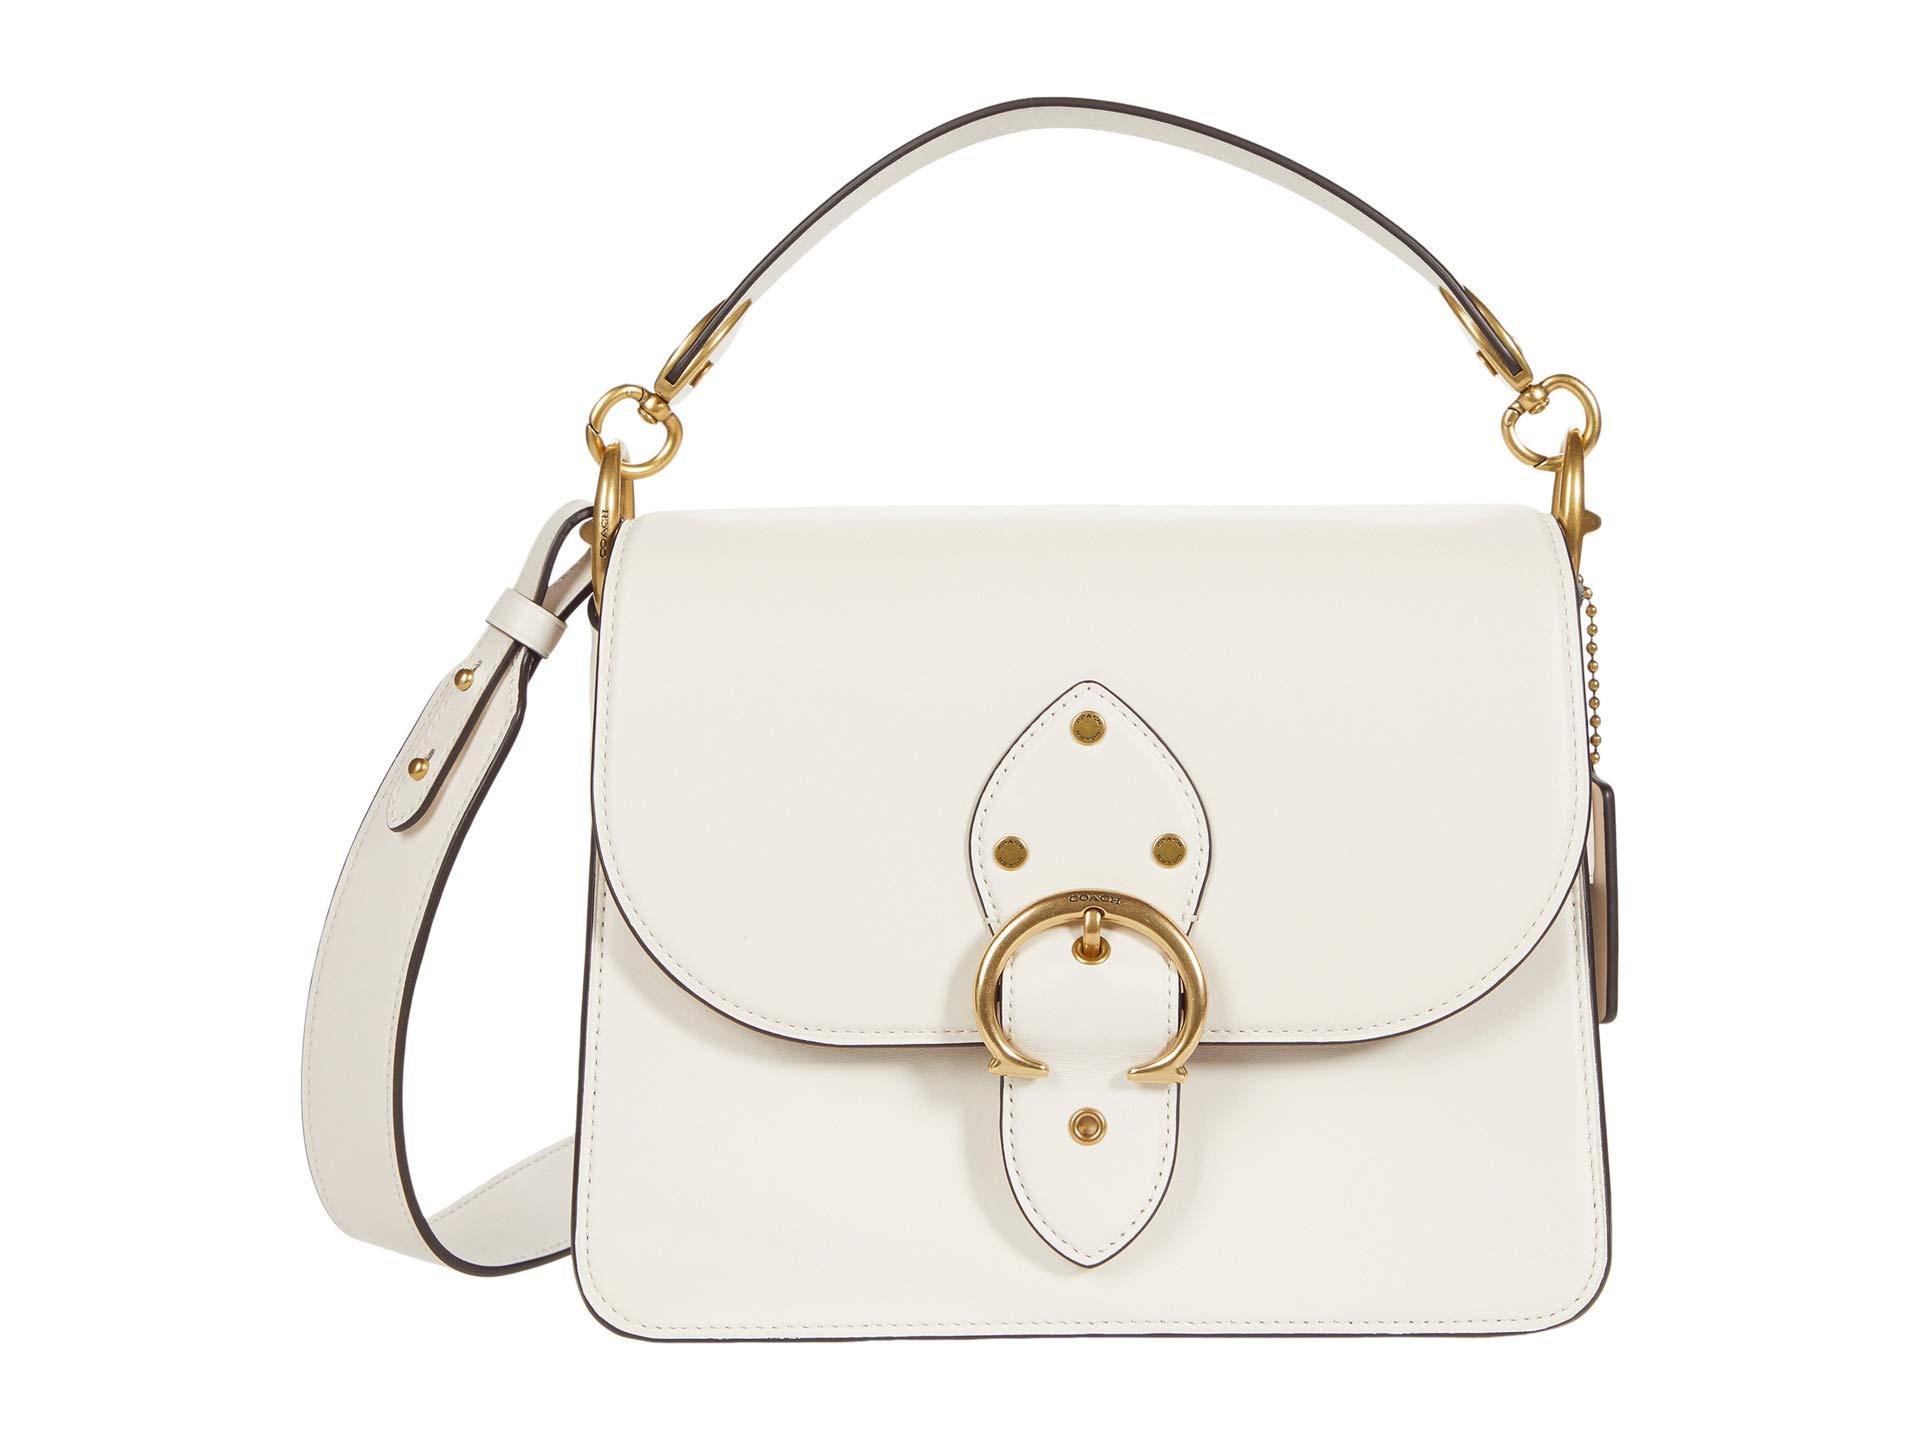 COACH Glovetanned Leather Beat Shoulder Bag in White | Lyst